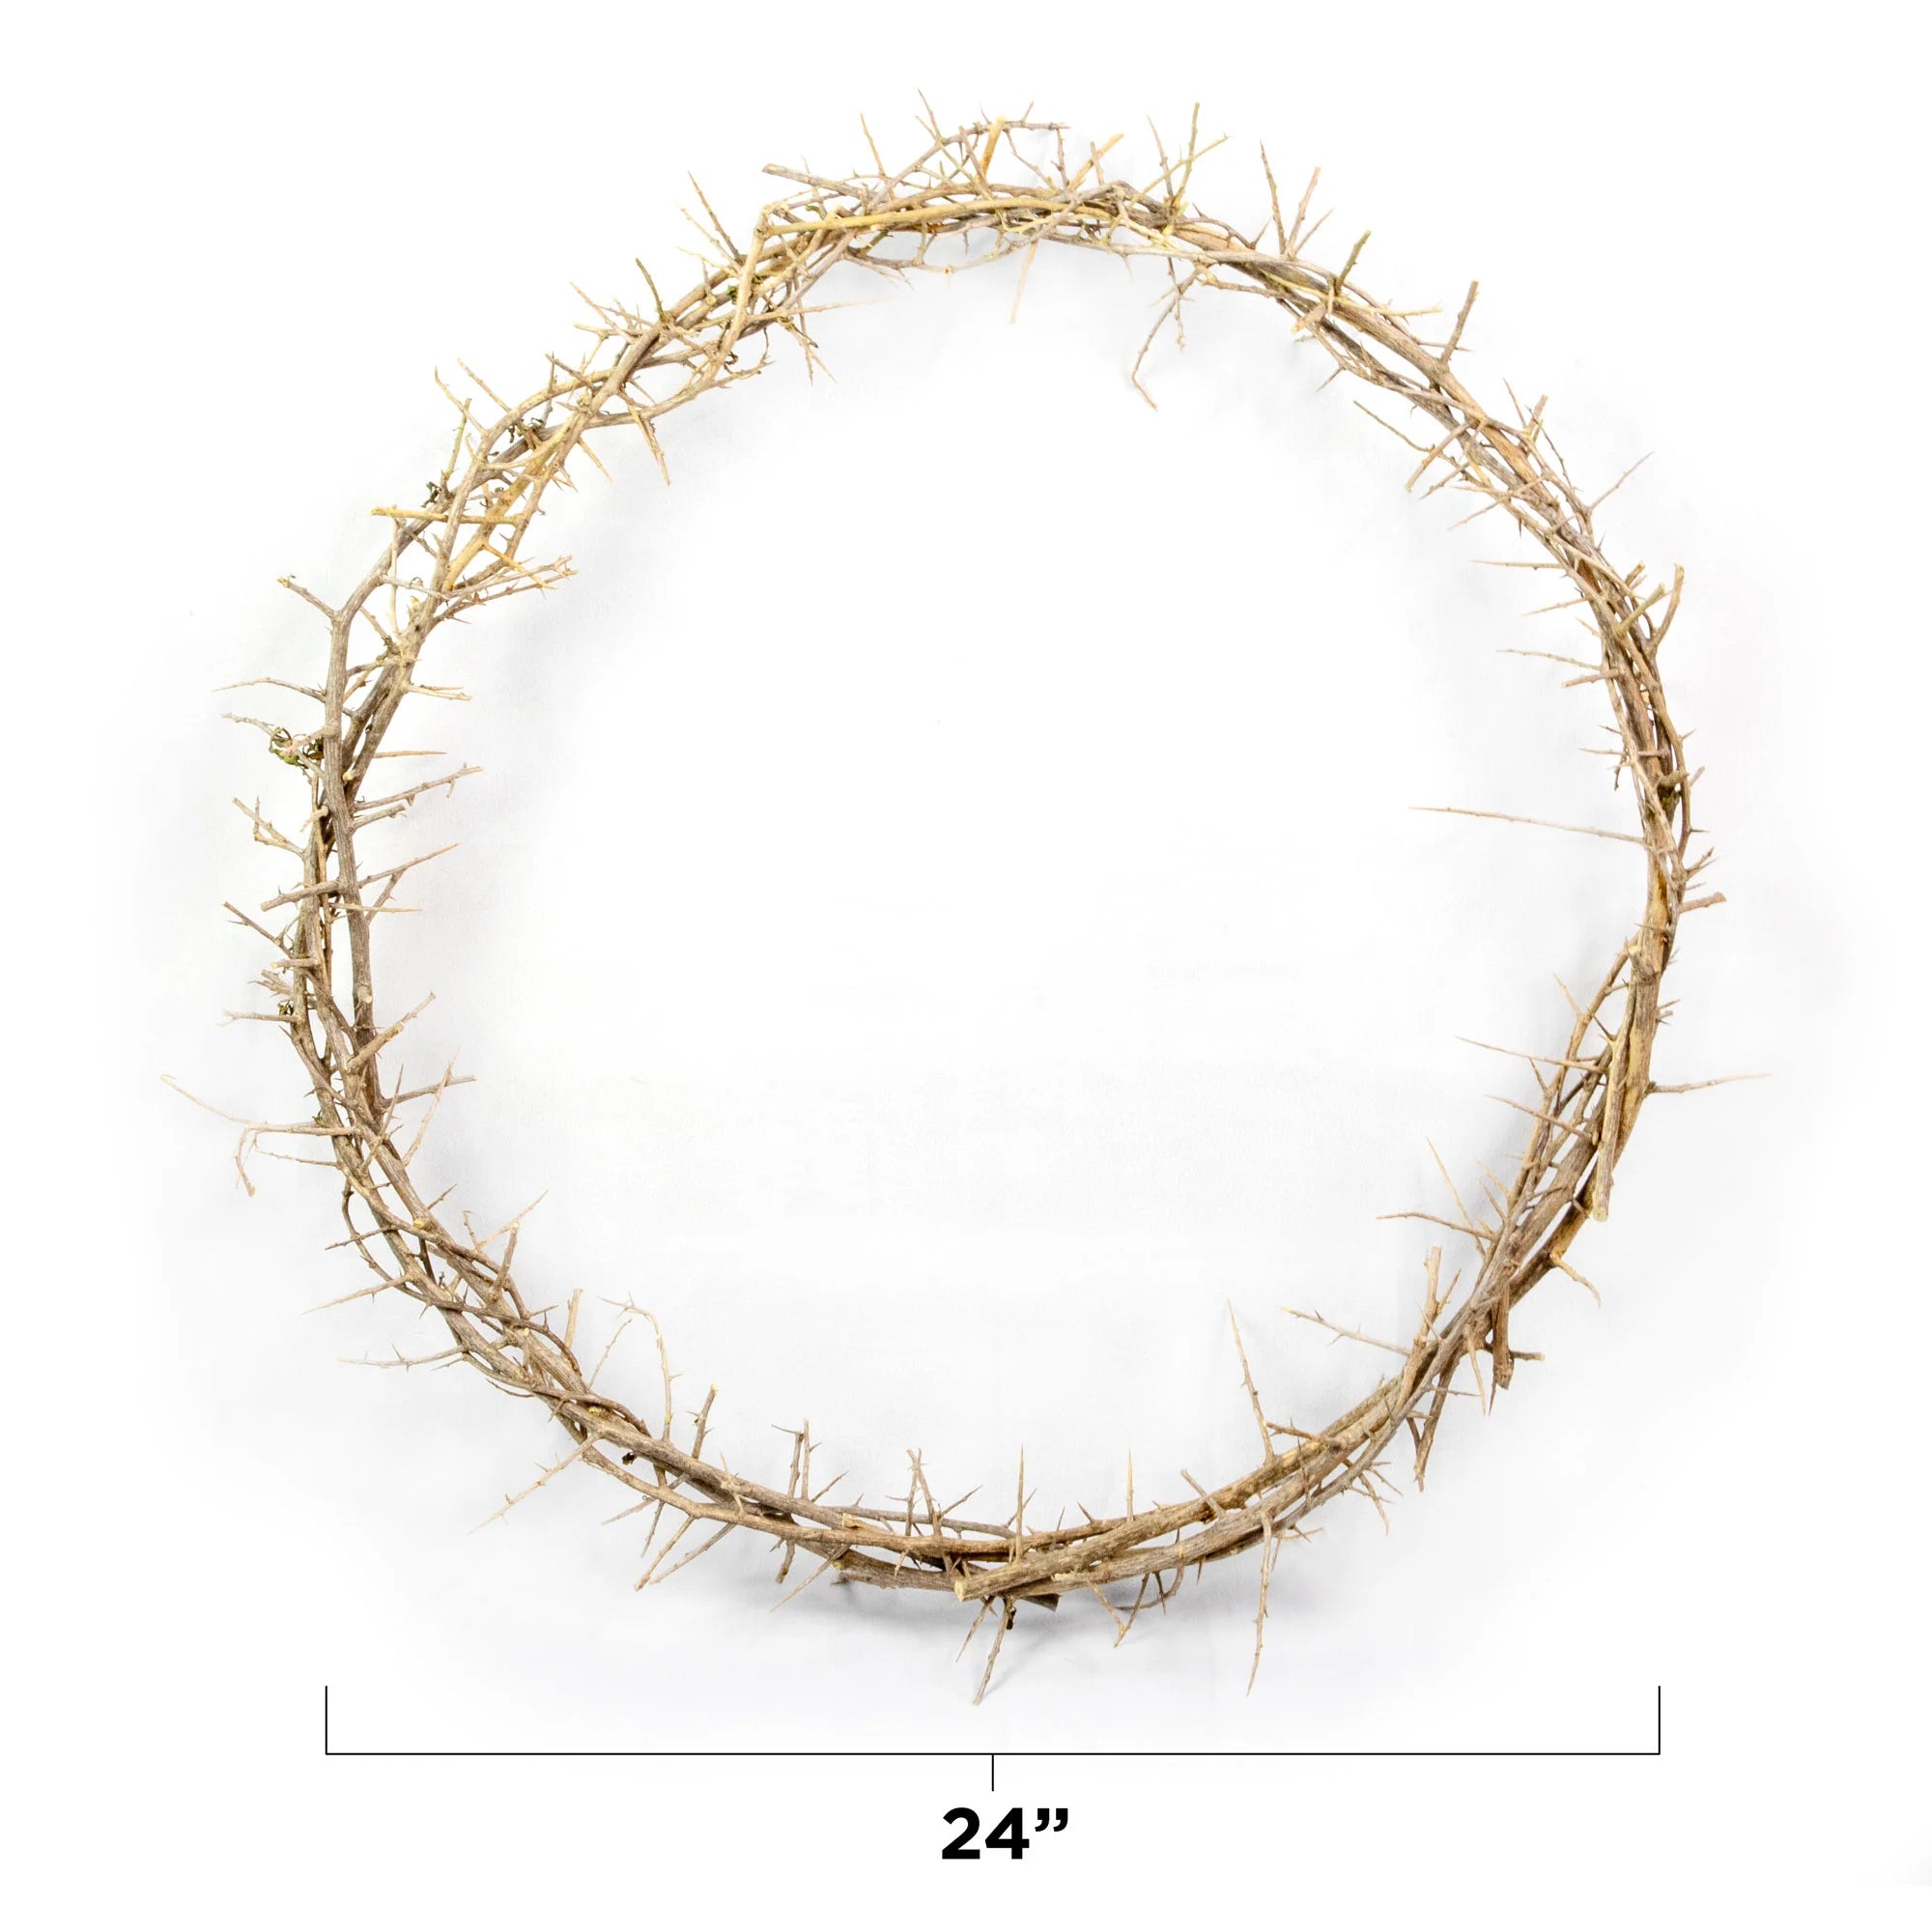 Crown of Thorns 24"